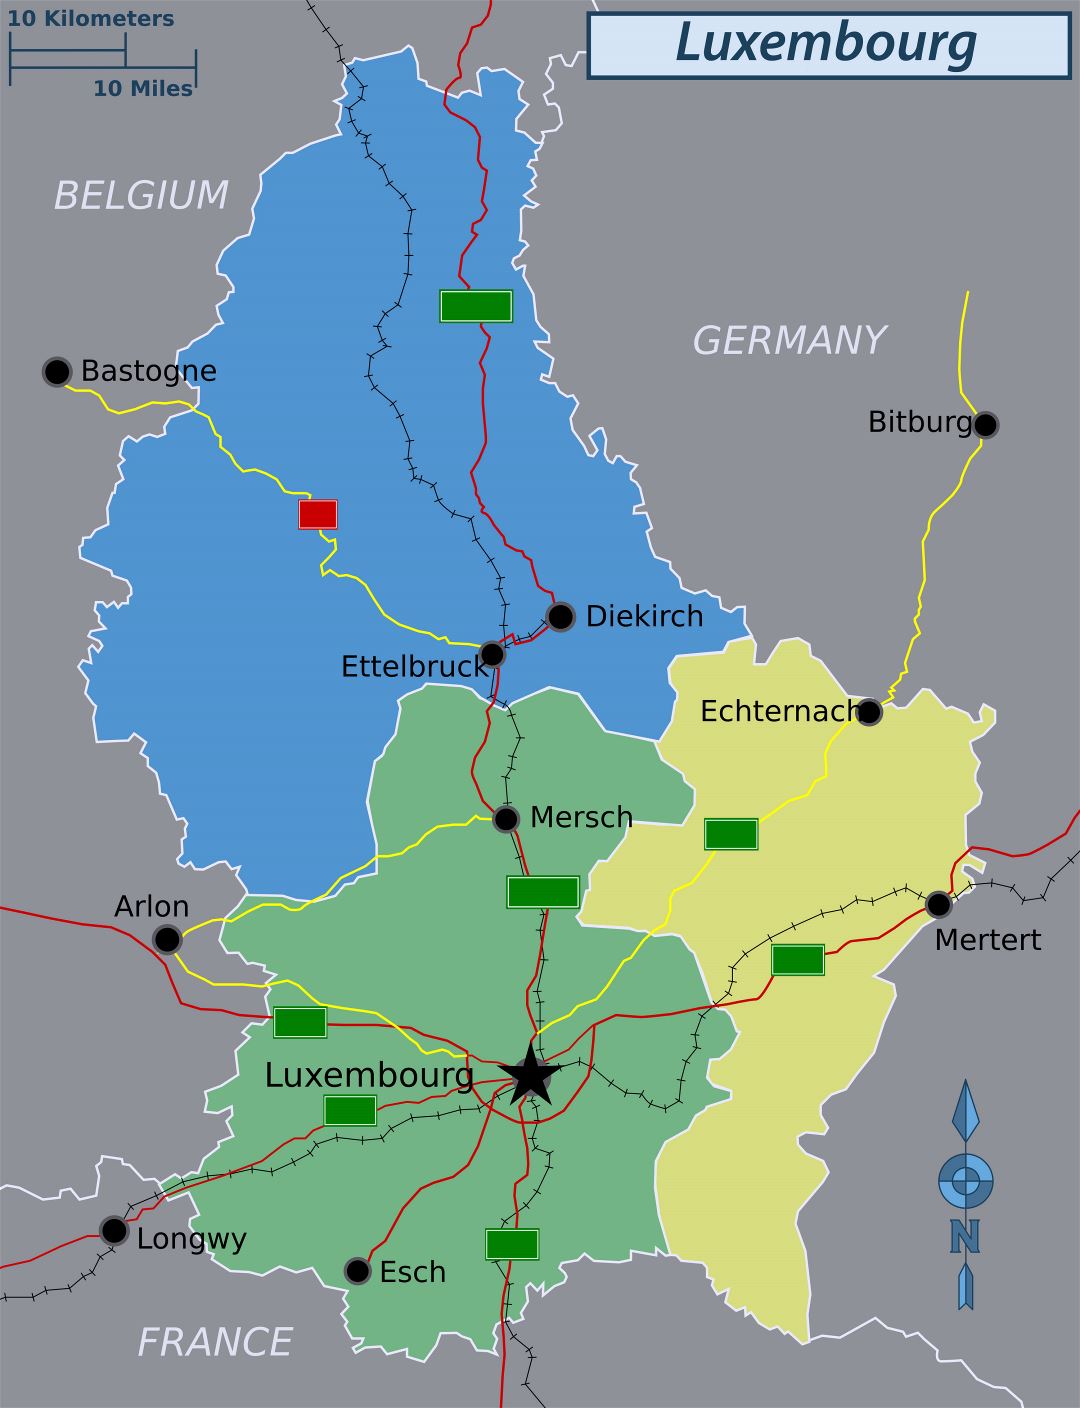 Large regions map of Luxembourg